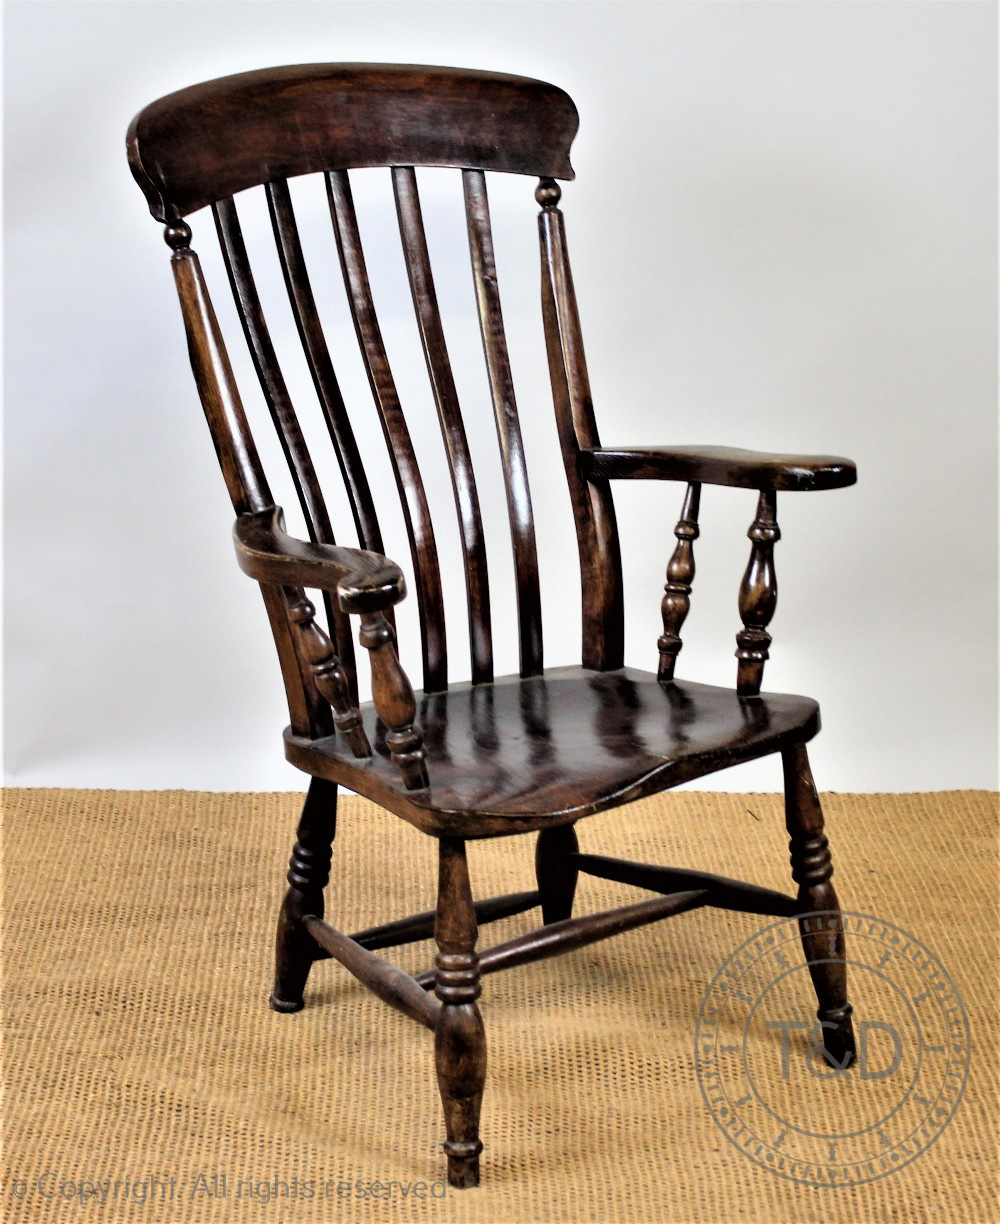 A 19th century beech and ash chair country kitchen chair, with solid seat on turned legs,